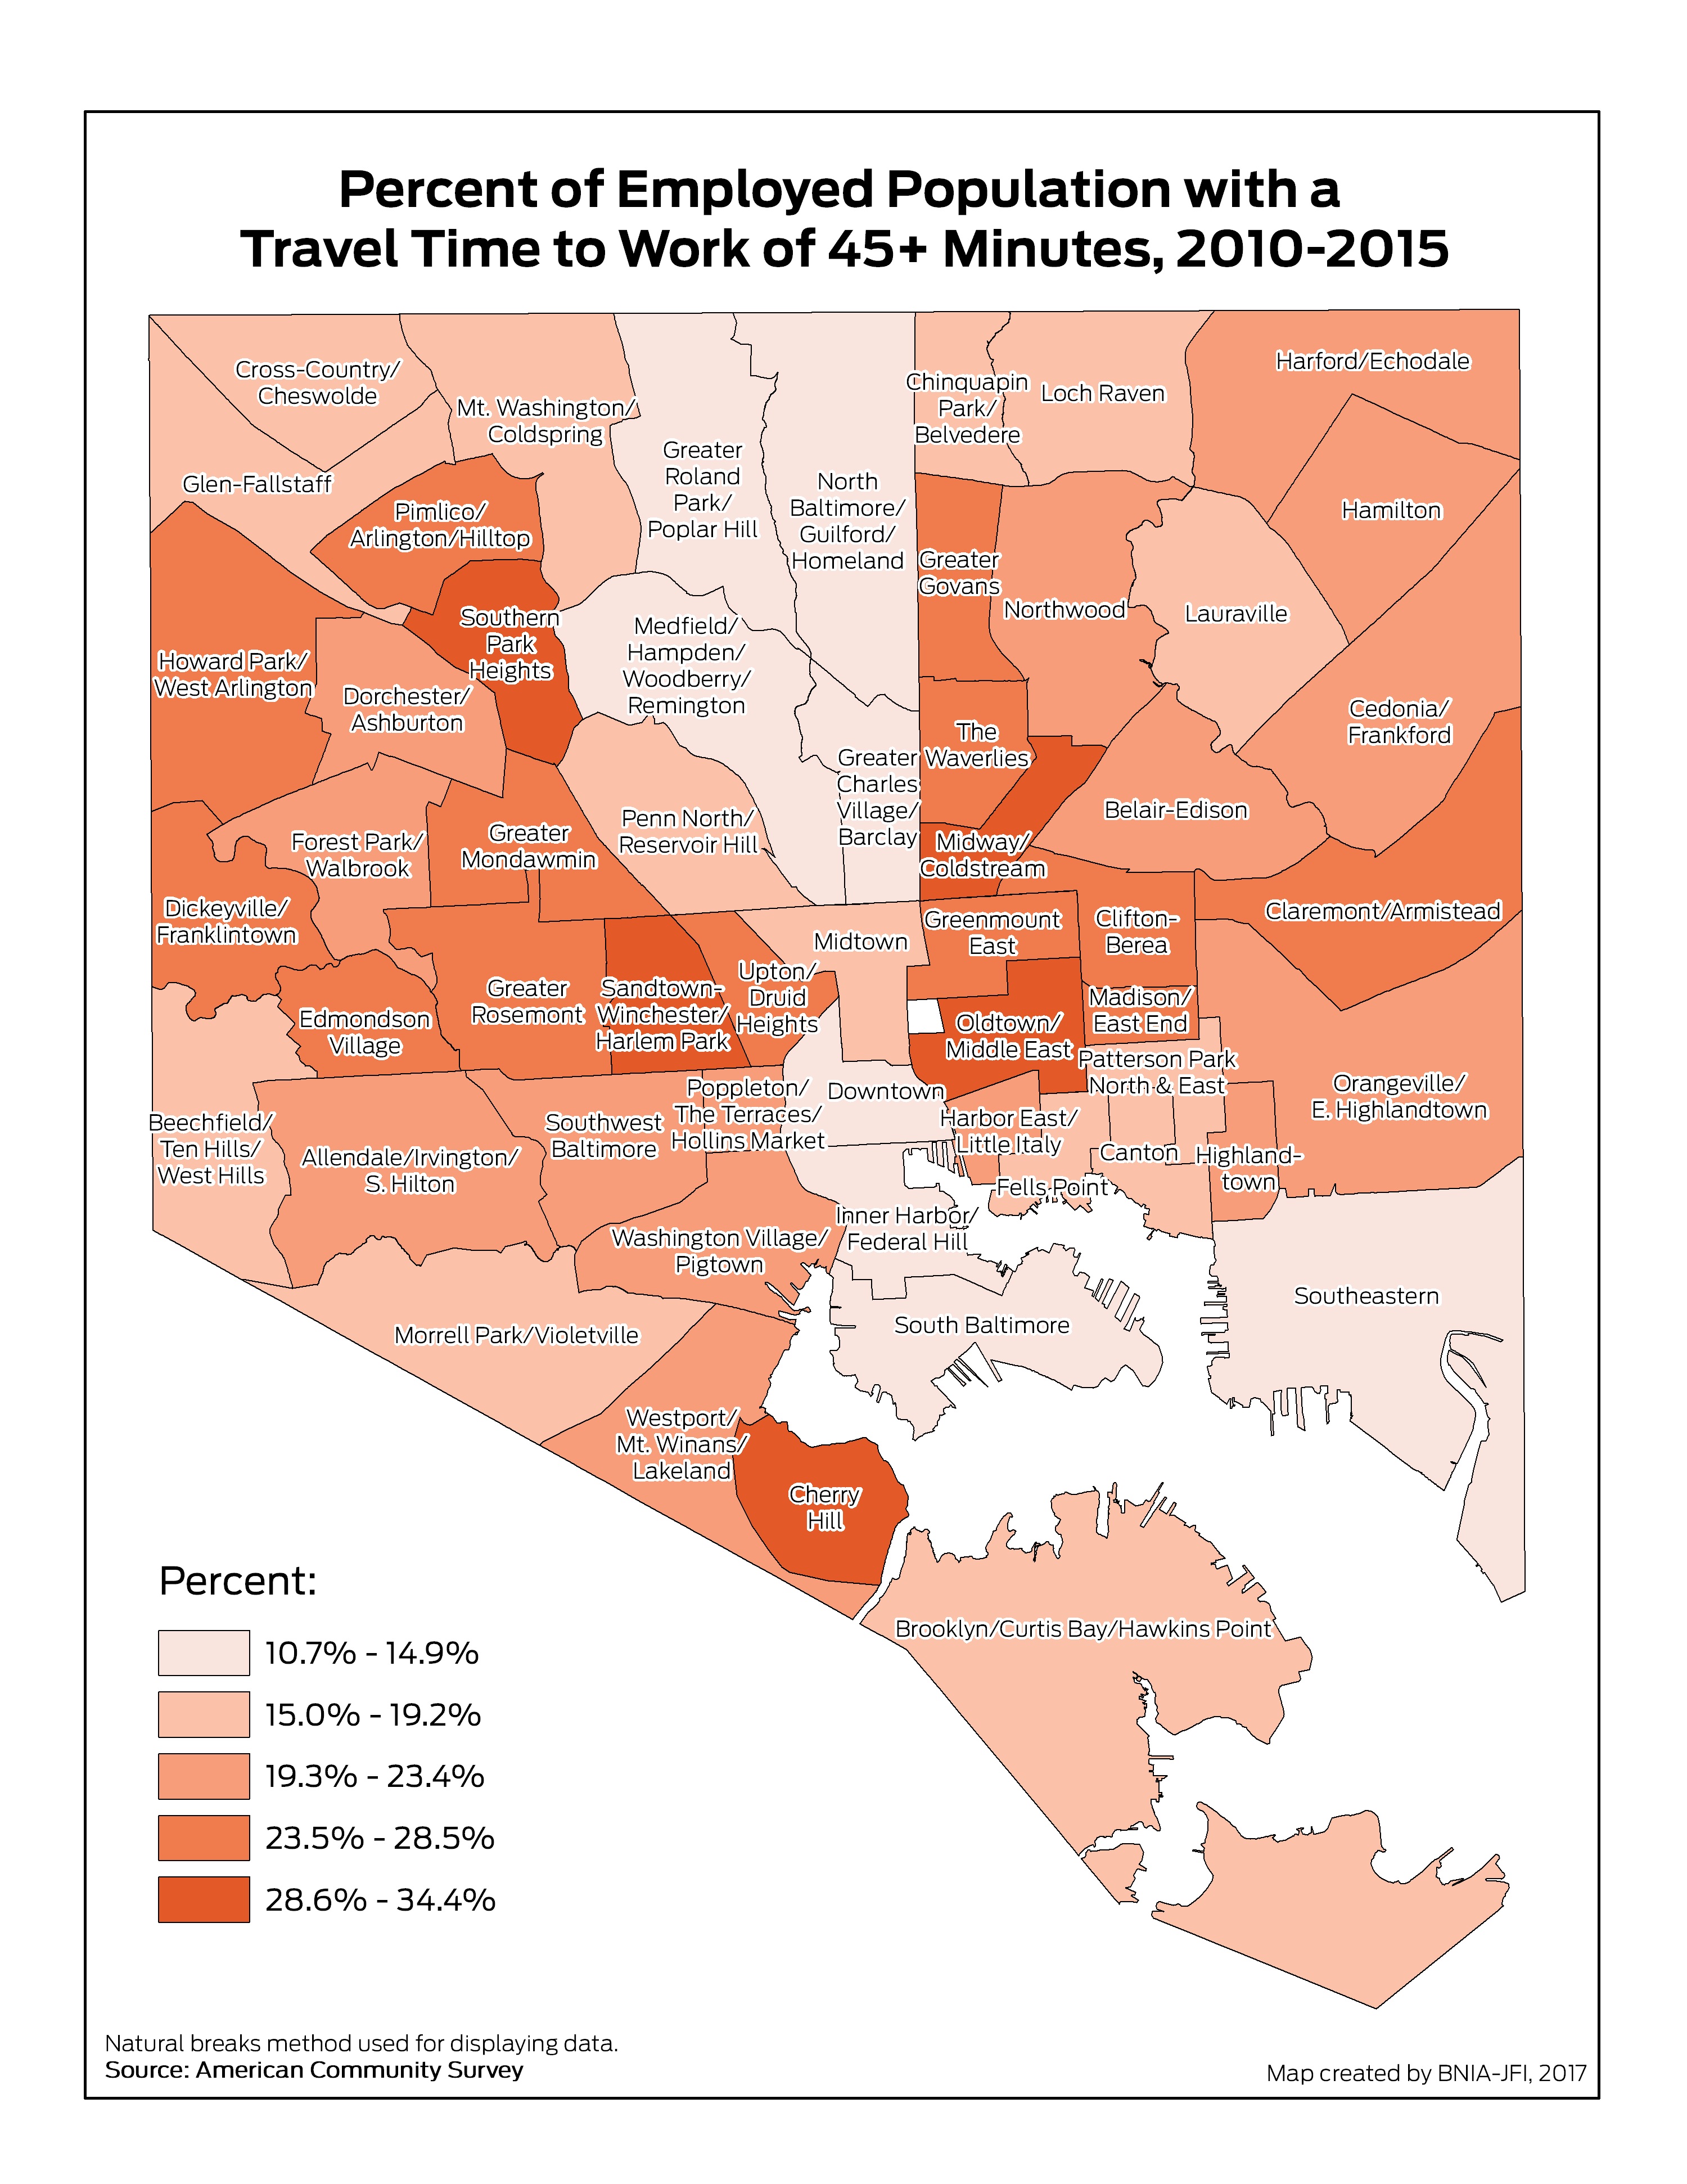 Lack of Accessibility Leads to High-Commute Time Neighborhoods